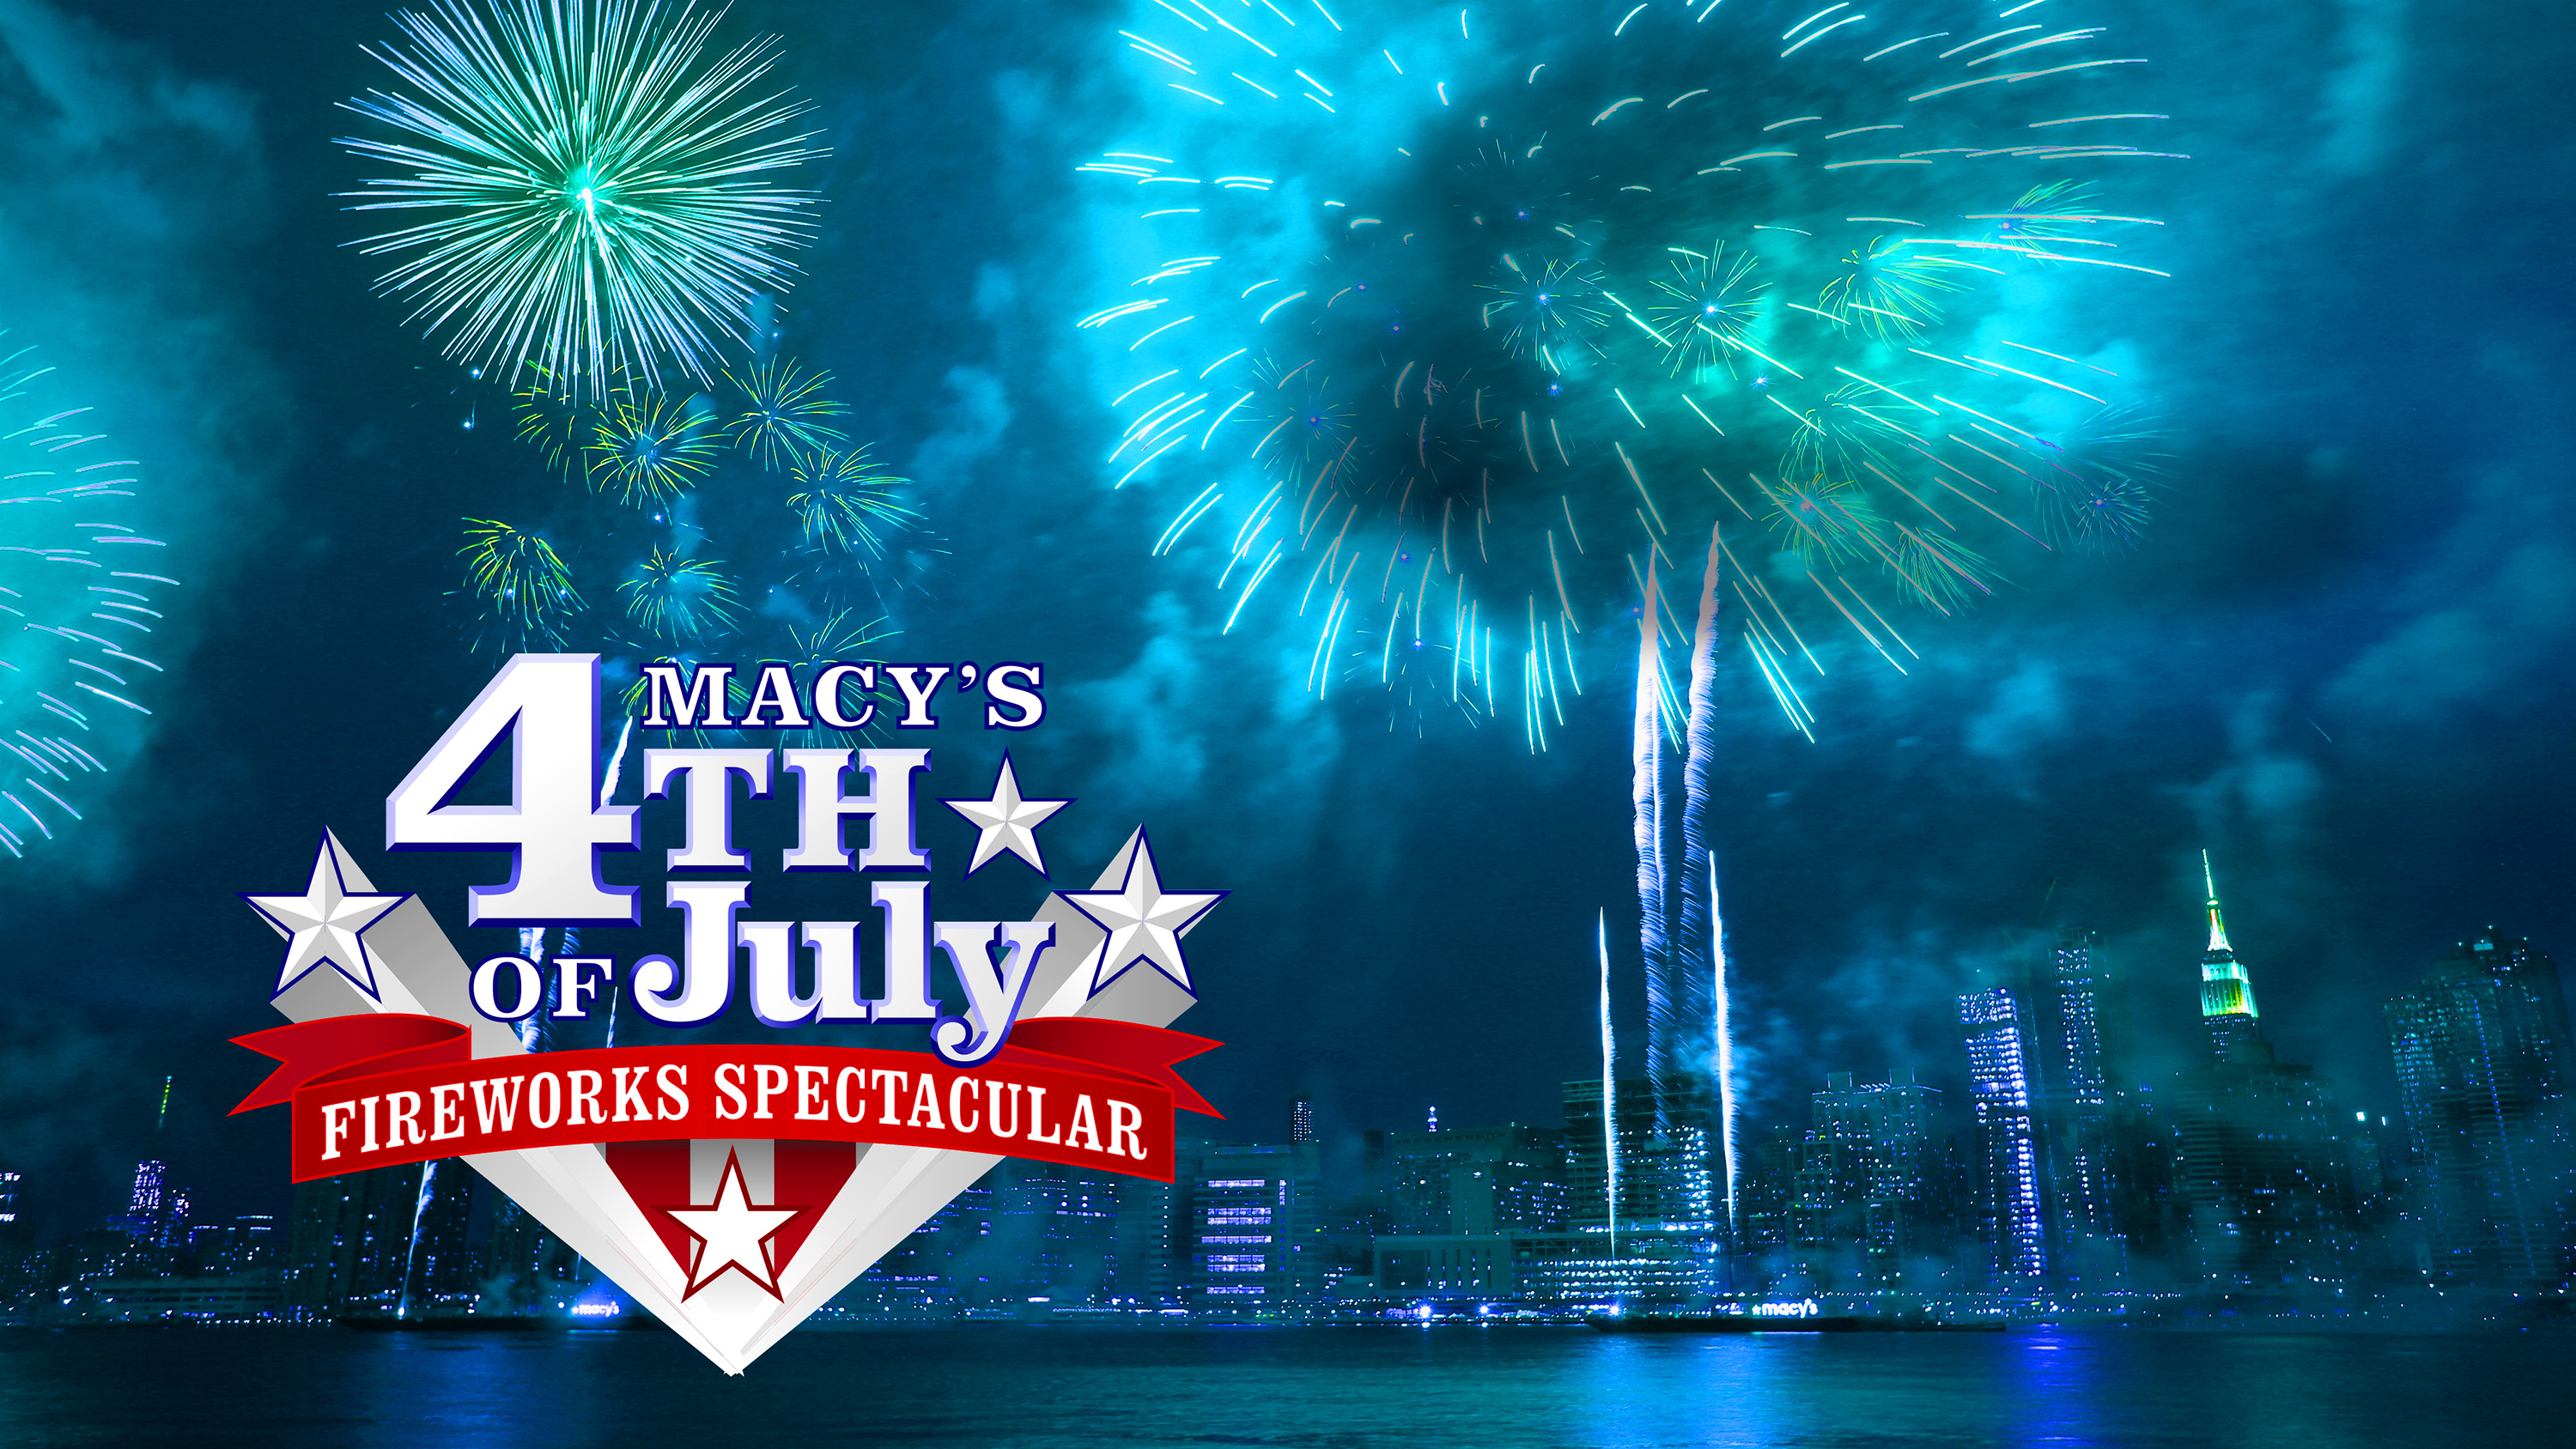 Macy's Fourth of July Fireworks are Back!